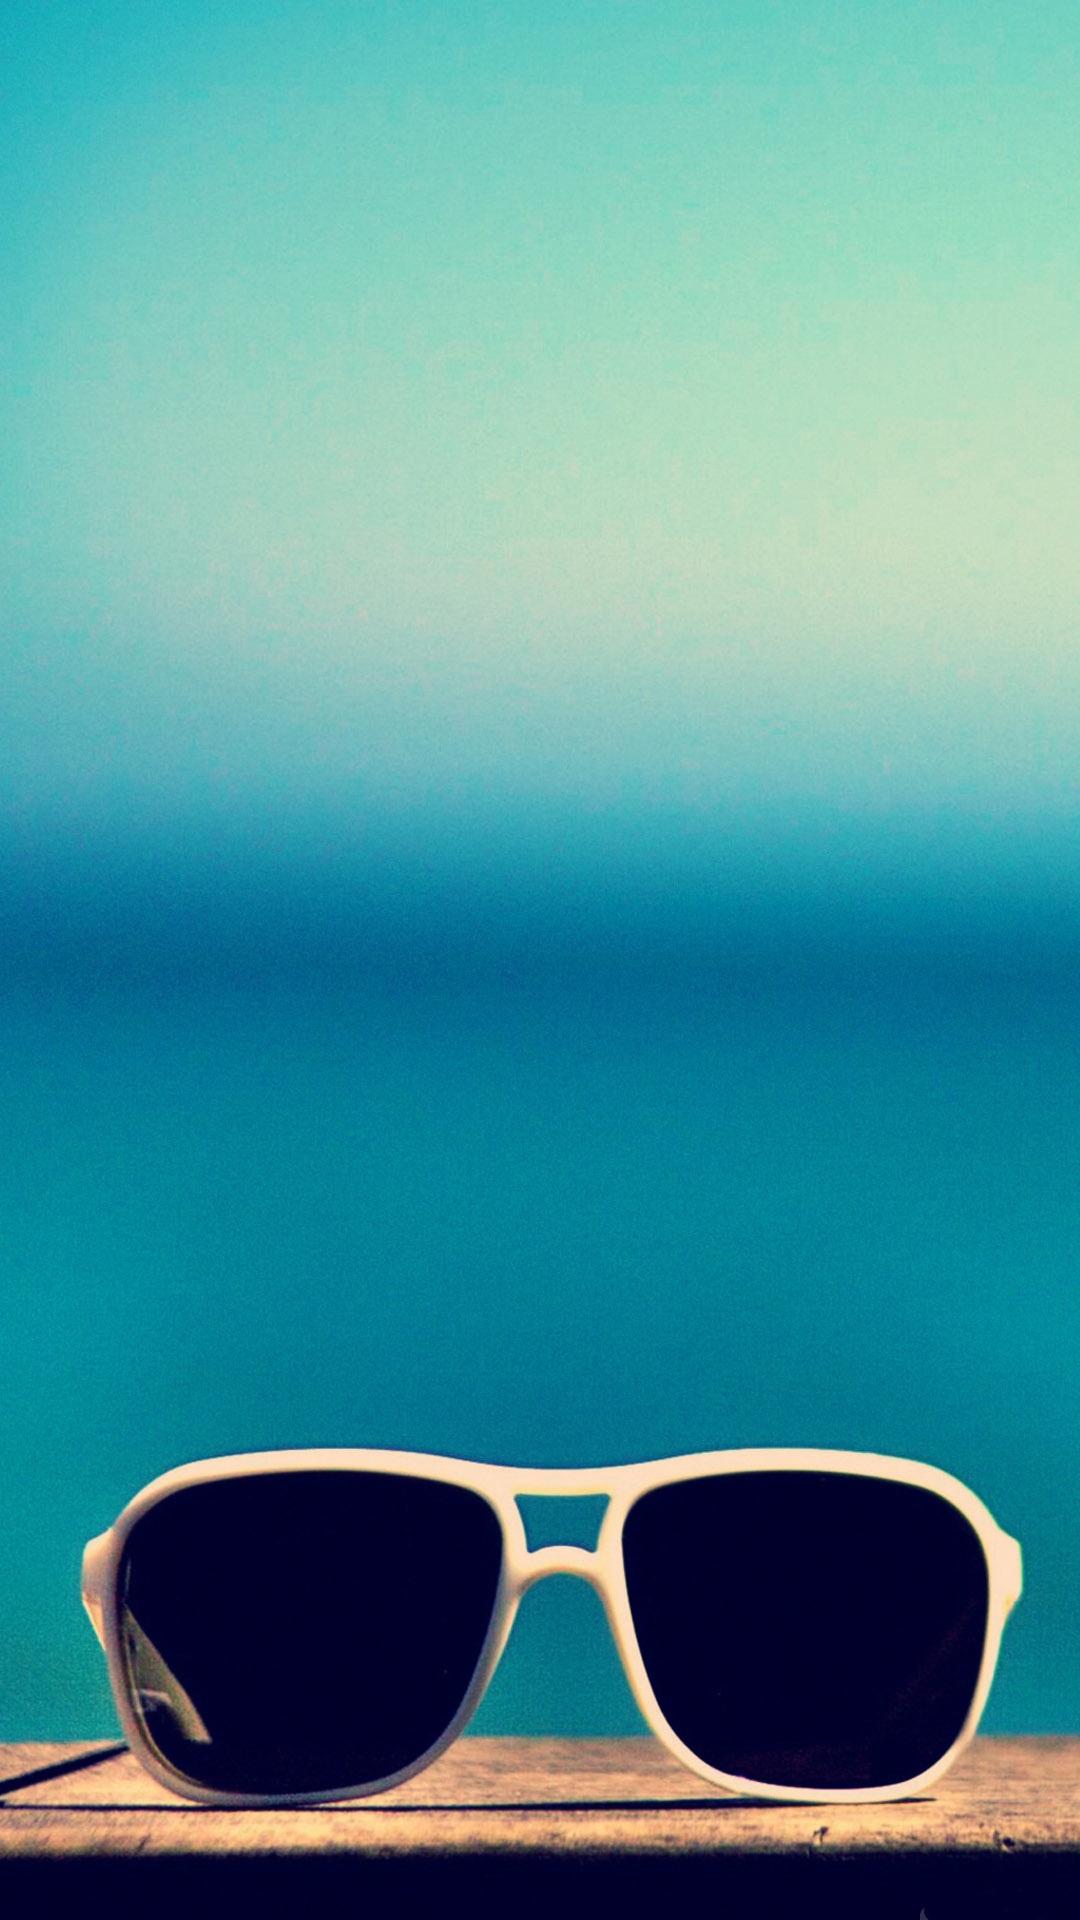 Wallpaper for Samsung Galaxy S4 of HD